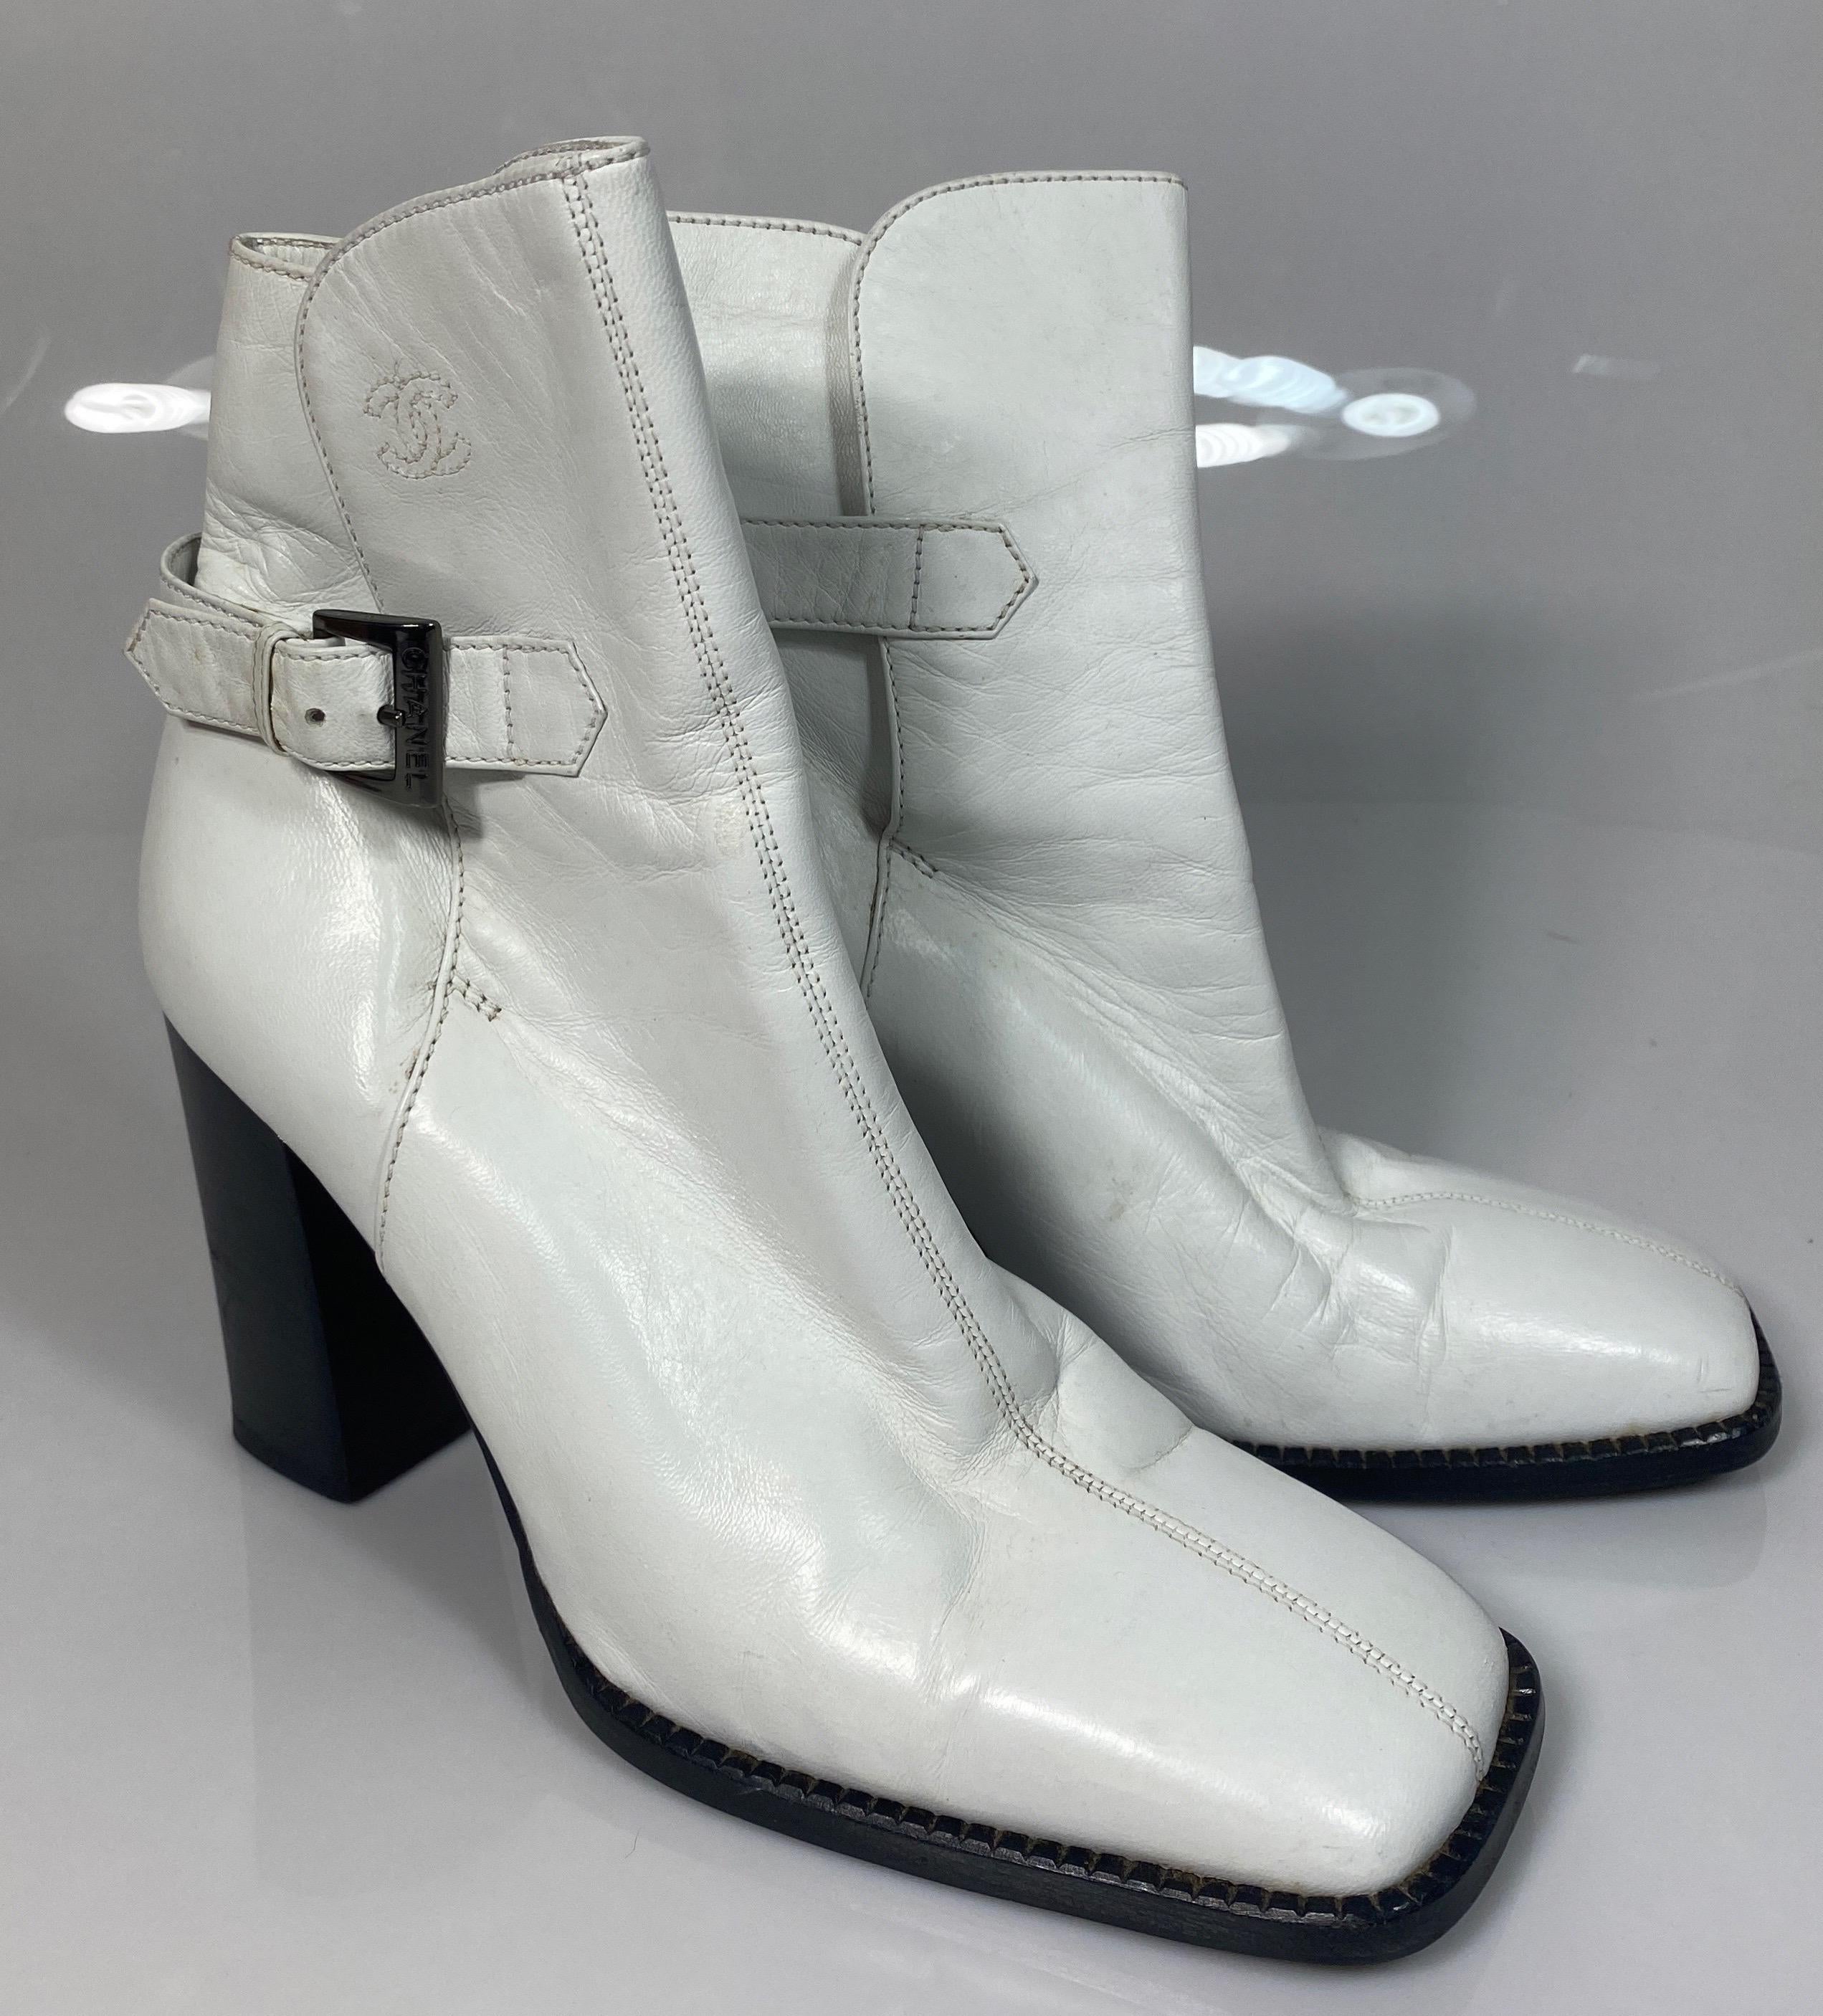 Chanel White Leather Chunky Wood Stack Heel Short Boot -Size 36.5 For Sale 4